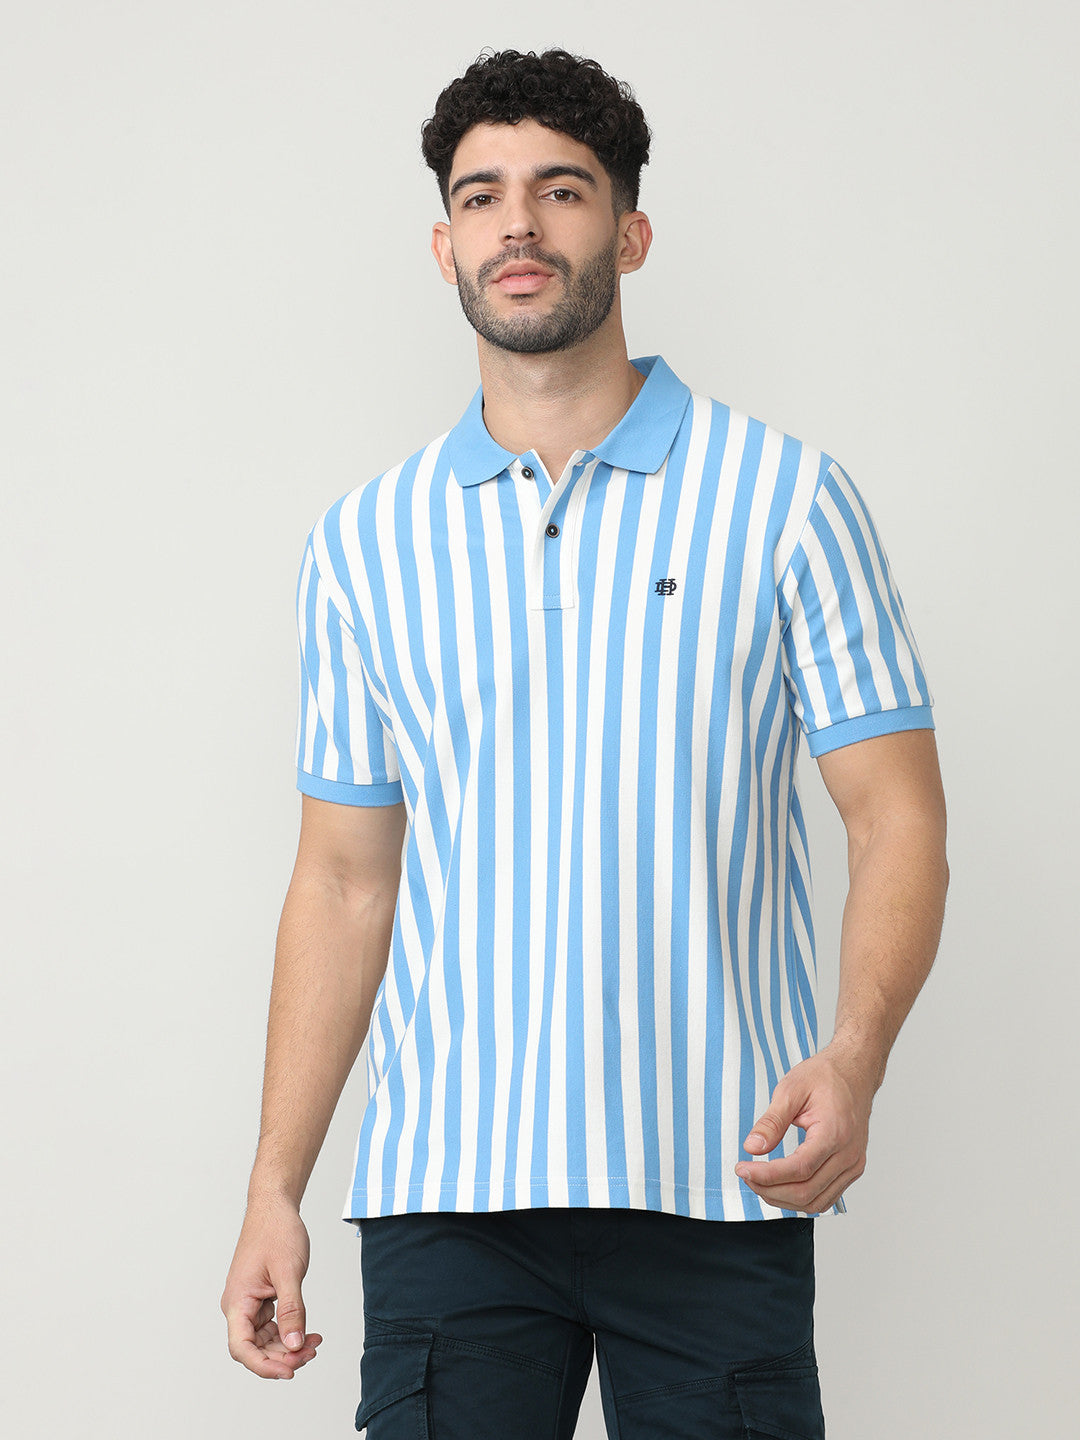 Royal Blue Pique Lycra Verticle Stripes Polo T-shirt With Constrast Collar